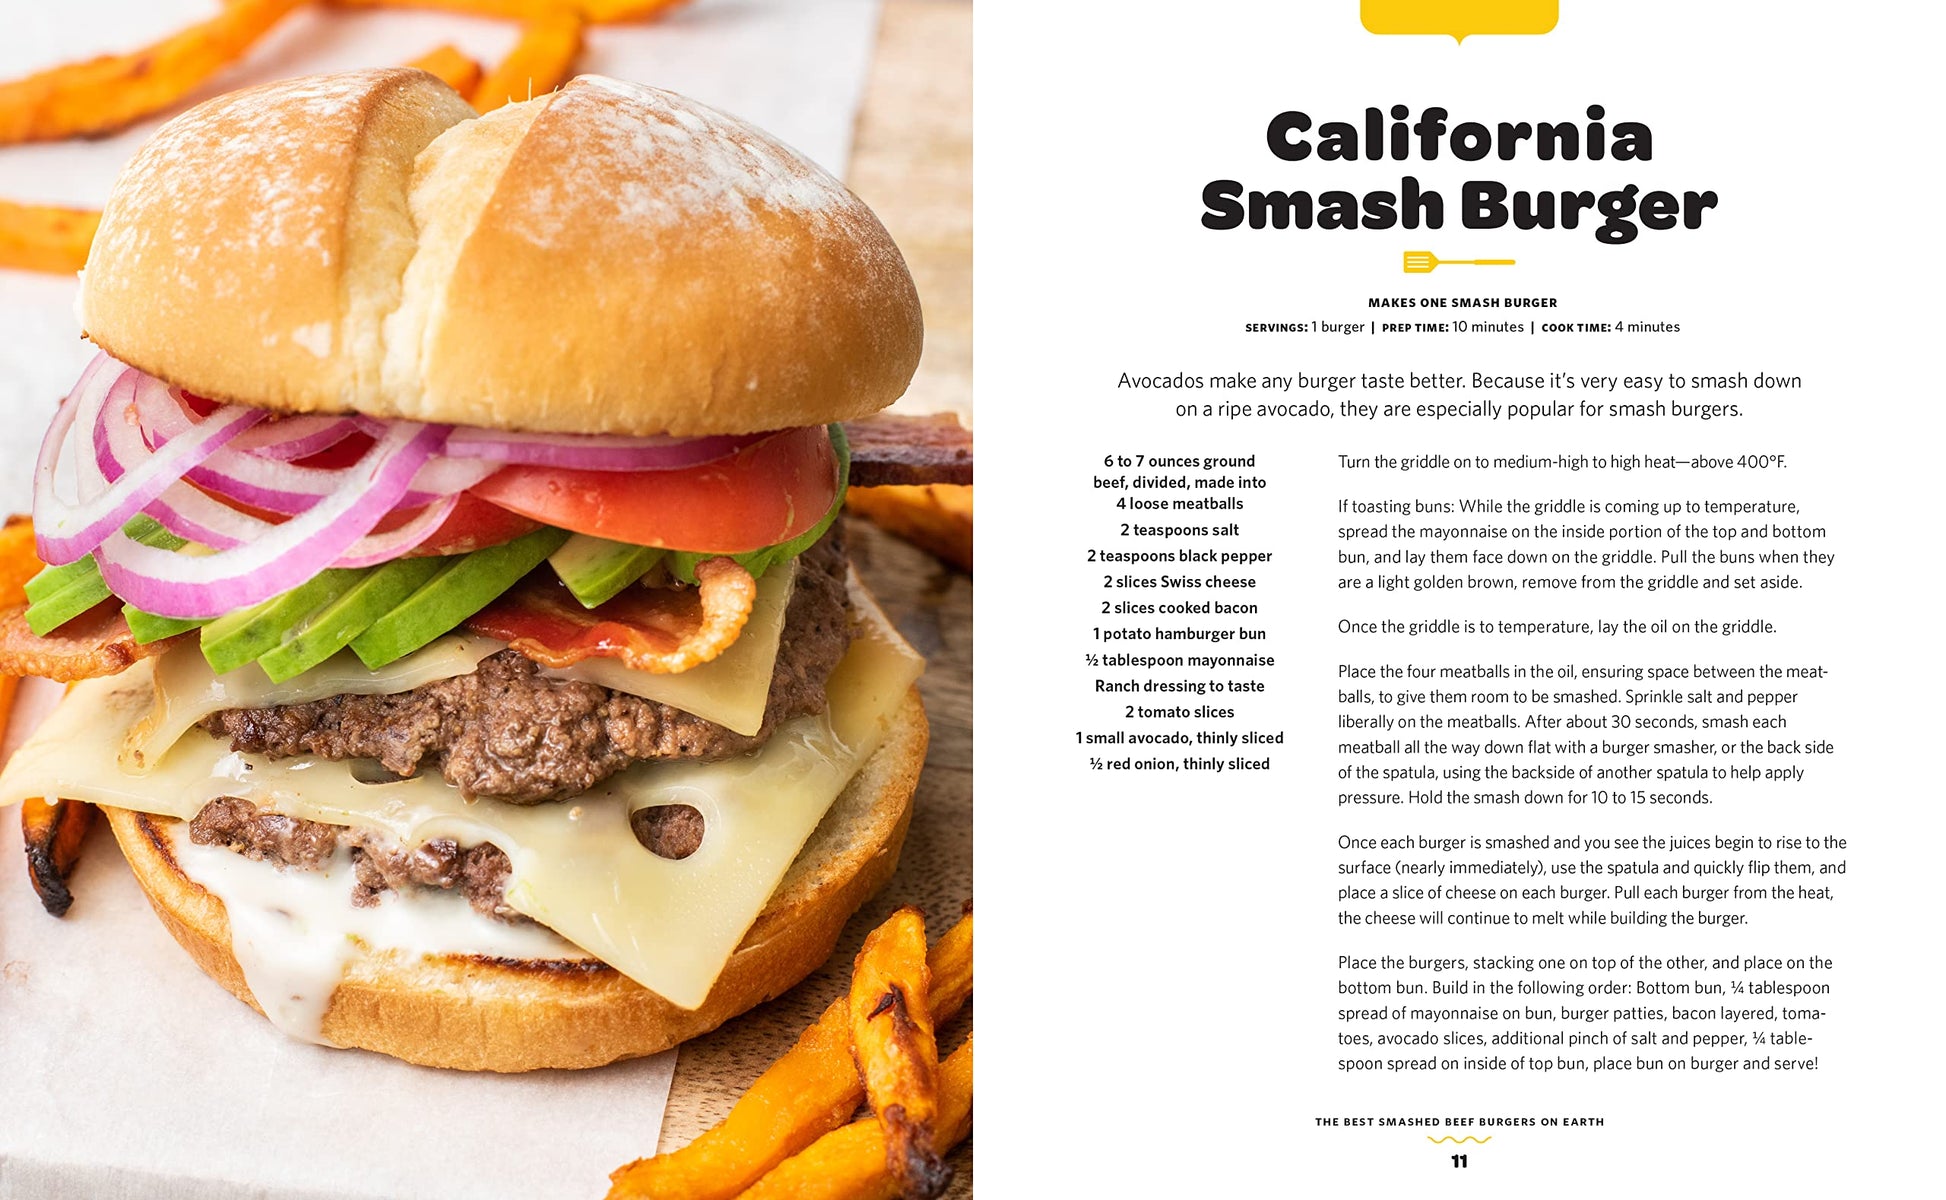 What Are Smash Burgers and What Makes Them Better Than Other Burgers?